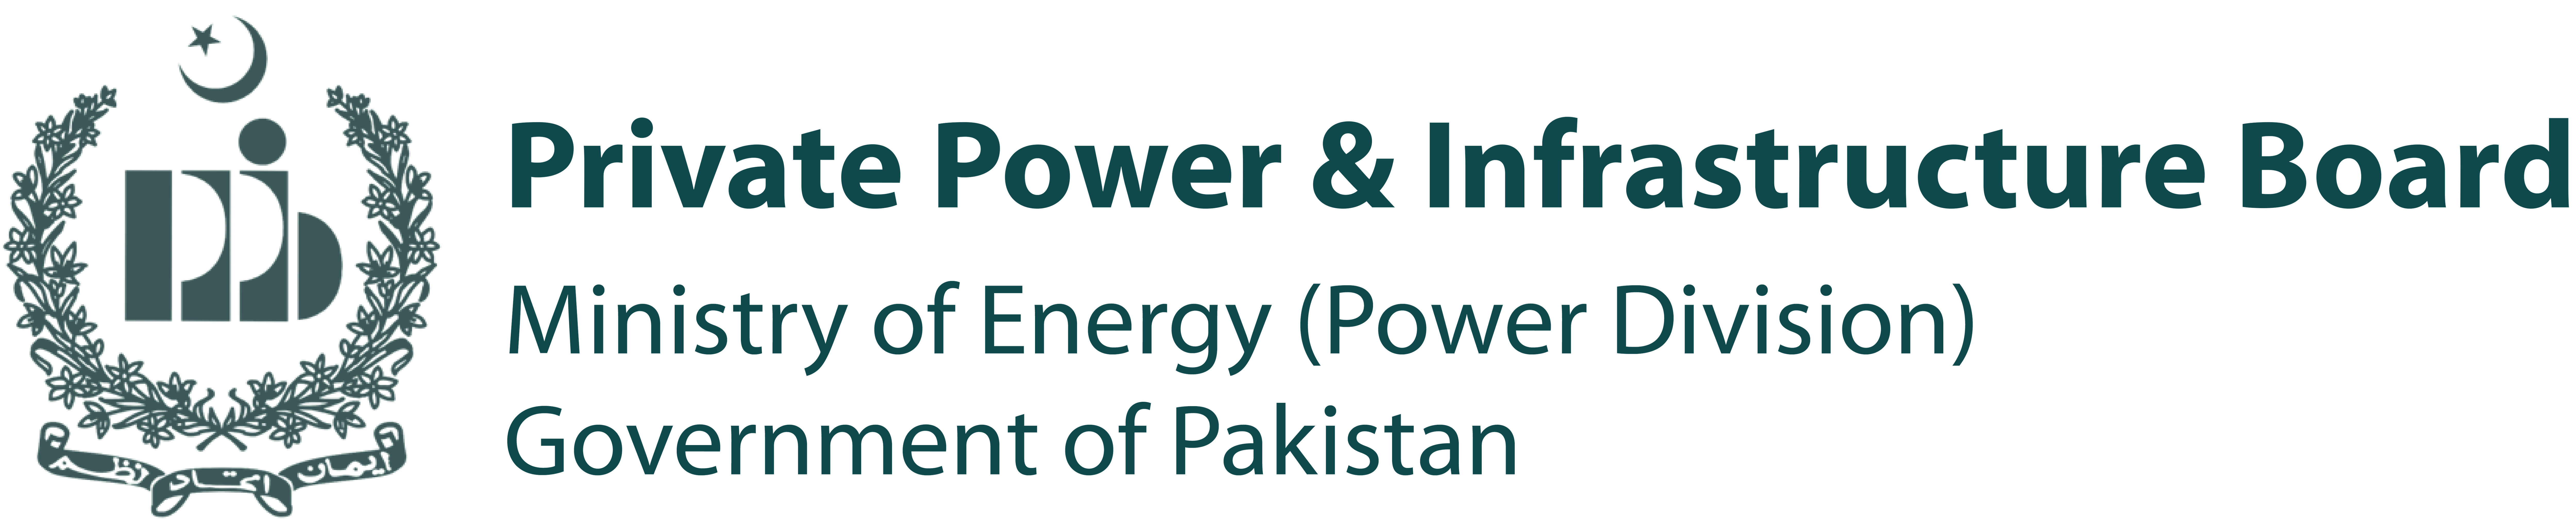 Private Power & Infrastructure Board